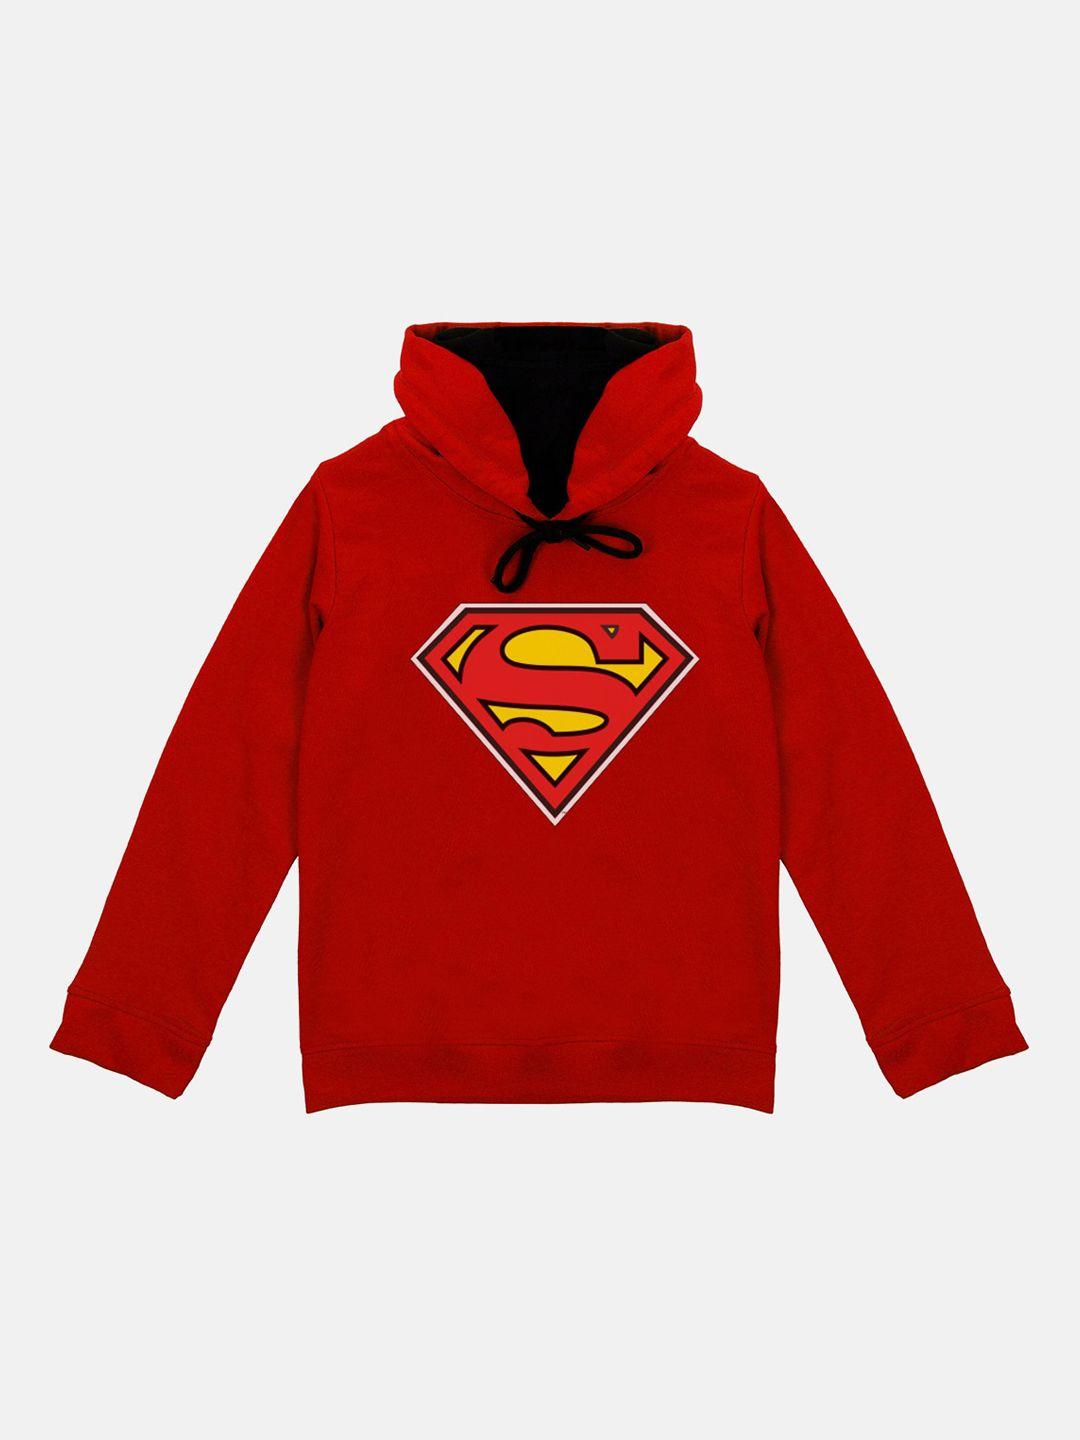 superman boys red printed hooded sweatshirt with attached face covering